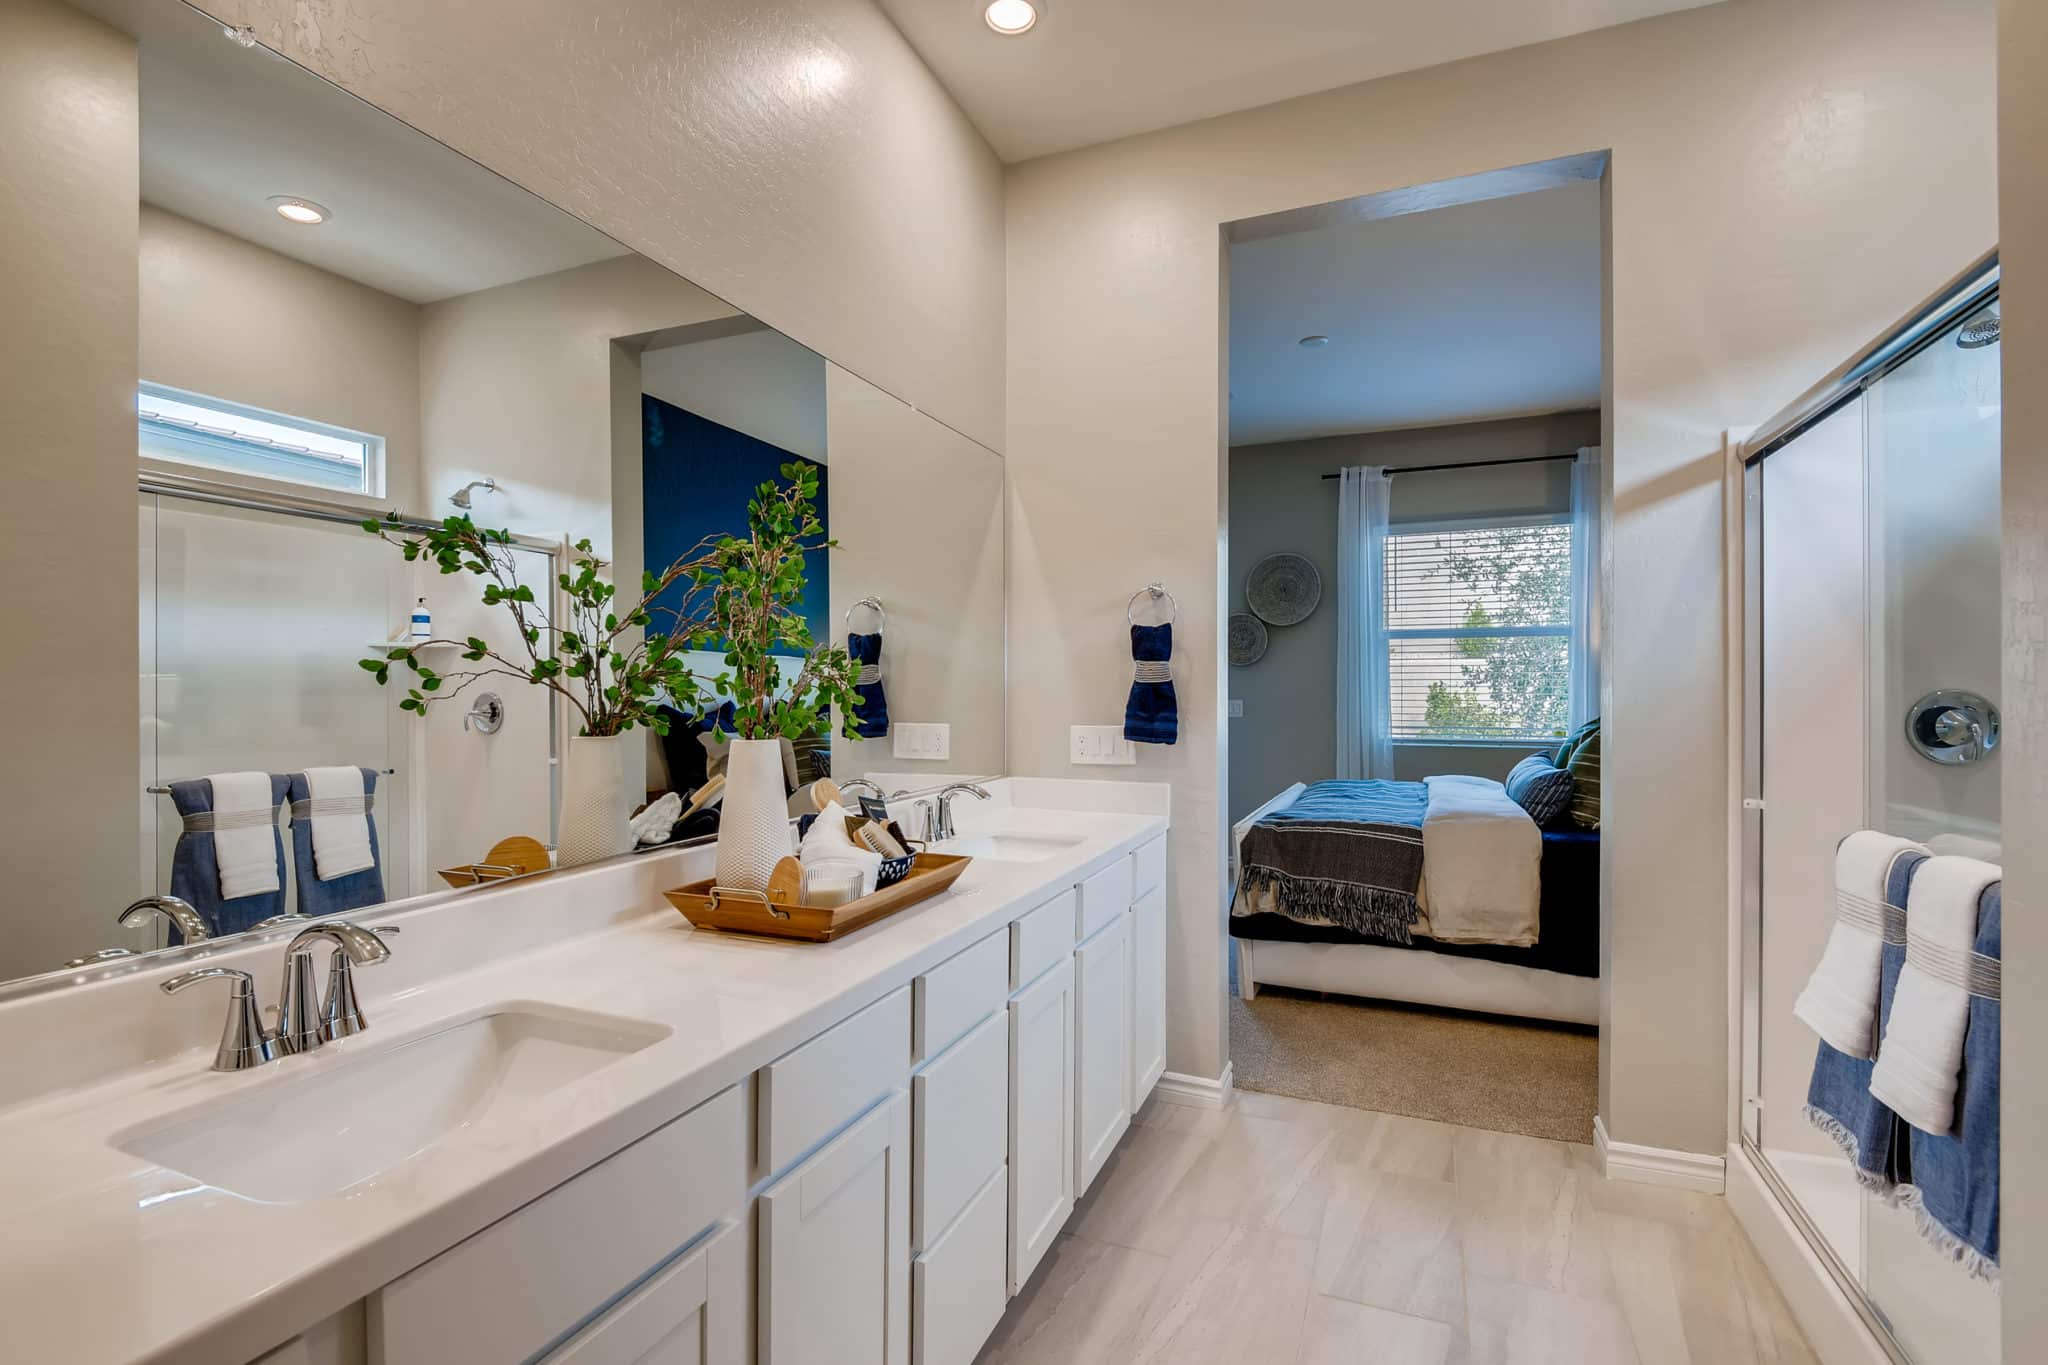 Primary Bathroom of Sidney model at Heritage by Lennar